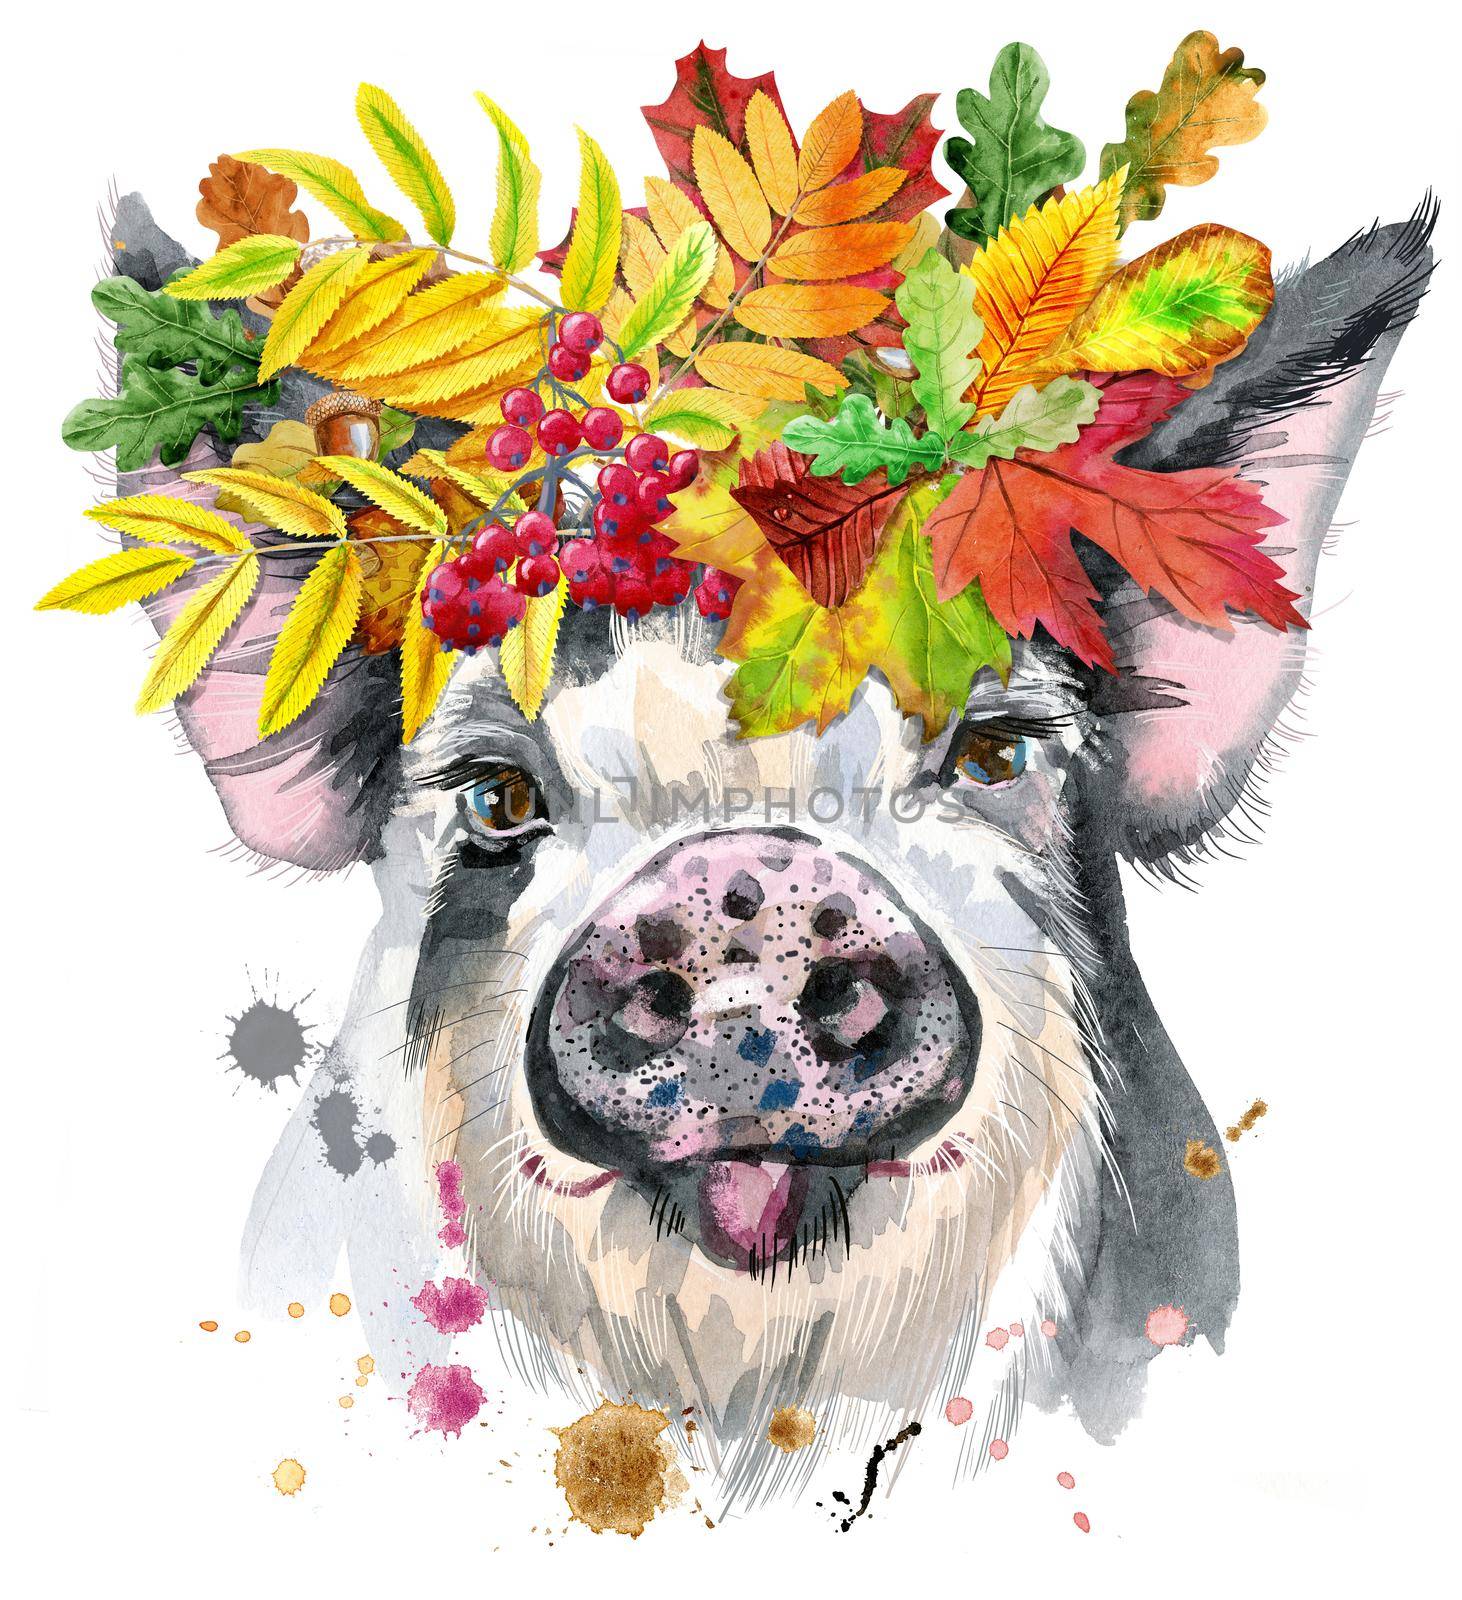 A beautiful pig in black spots in a with wreath of leaves. Watercolor illustration with splashes.